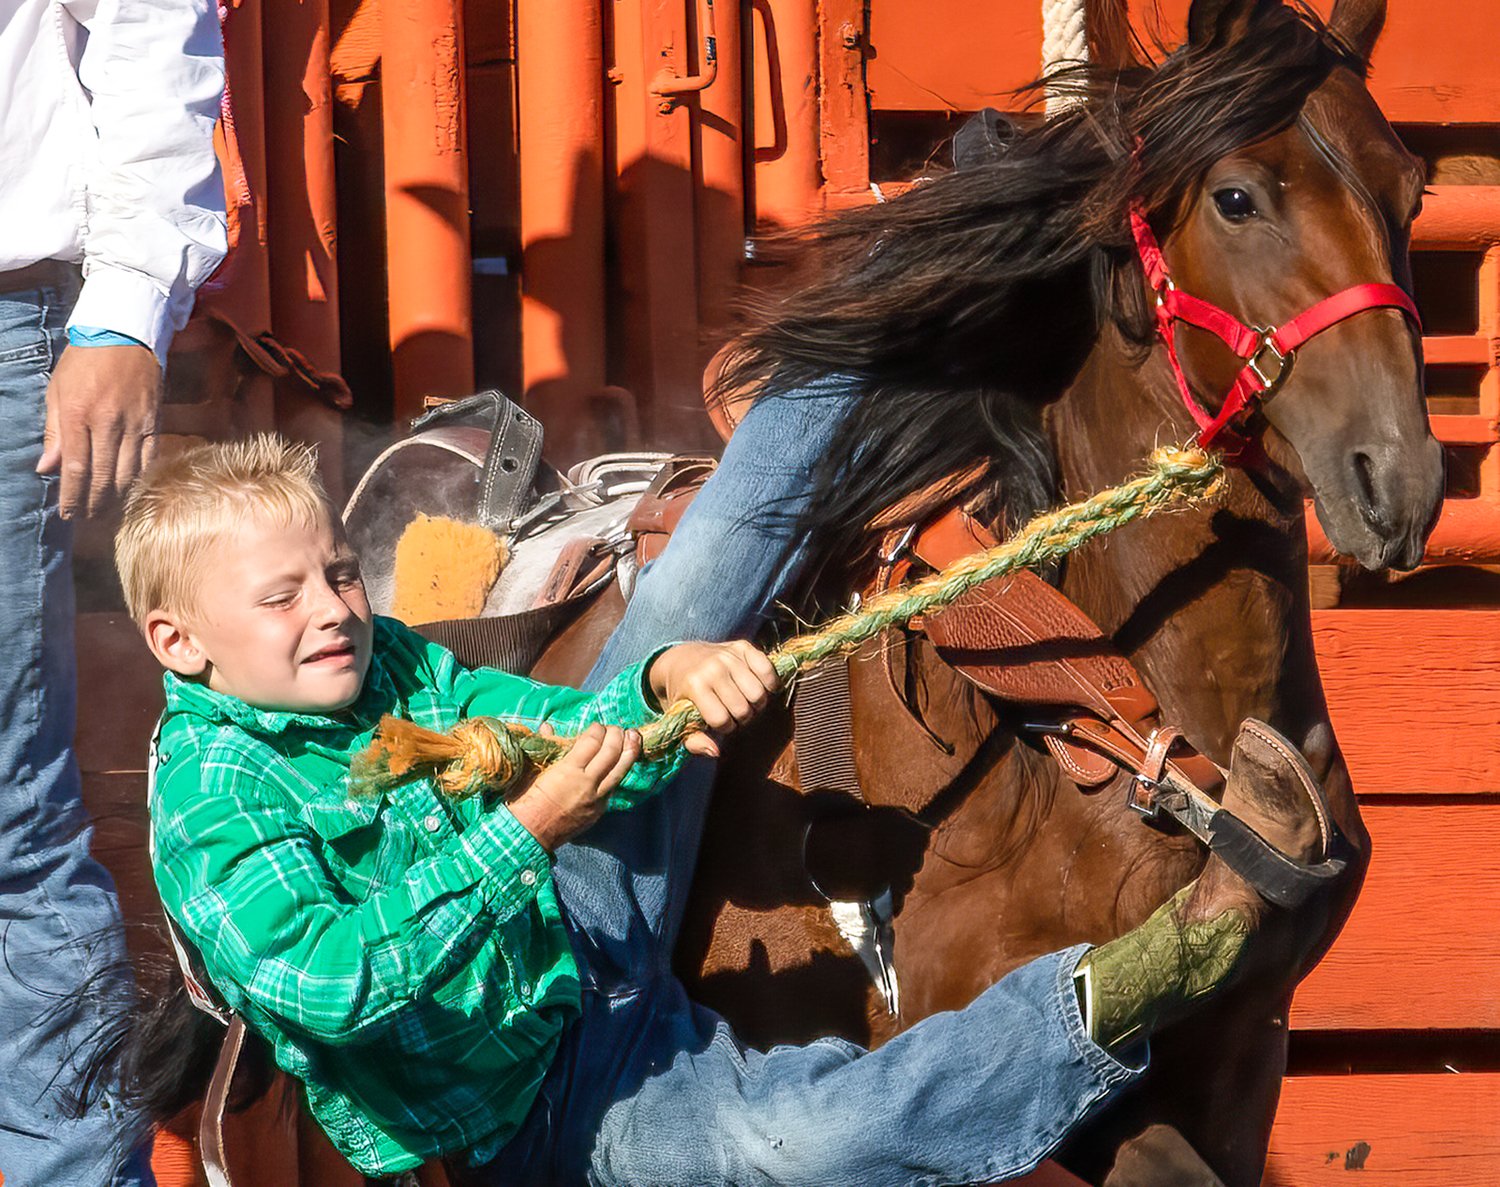 This youngster's mini-bronc ride was over in a flash, but there's little doubt he'll be back to try again for years to come.